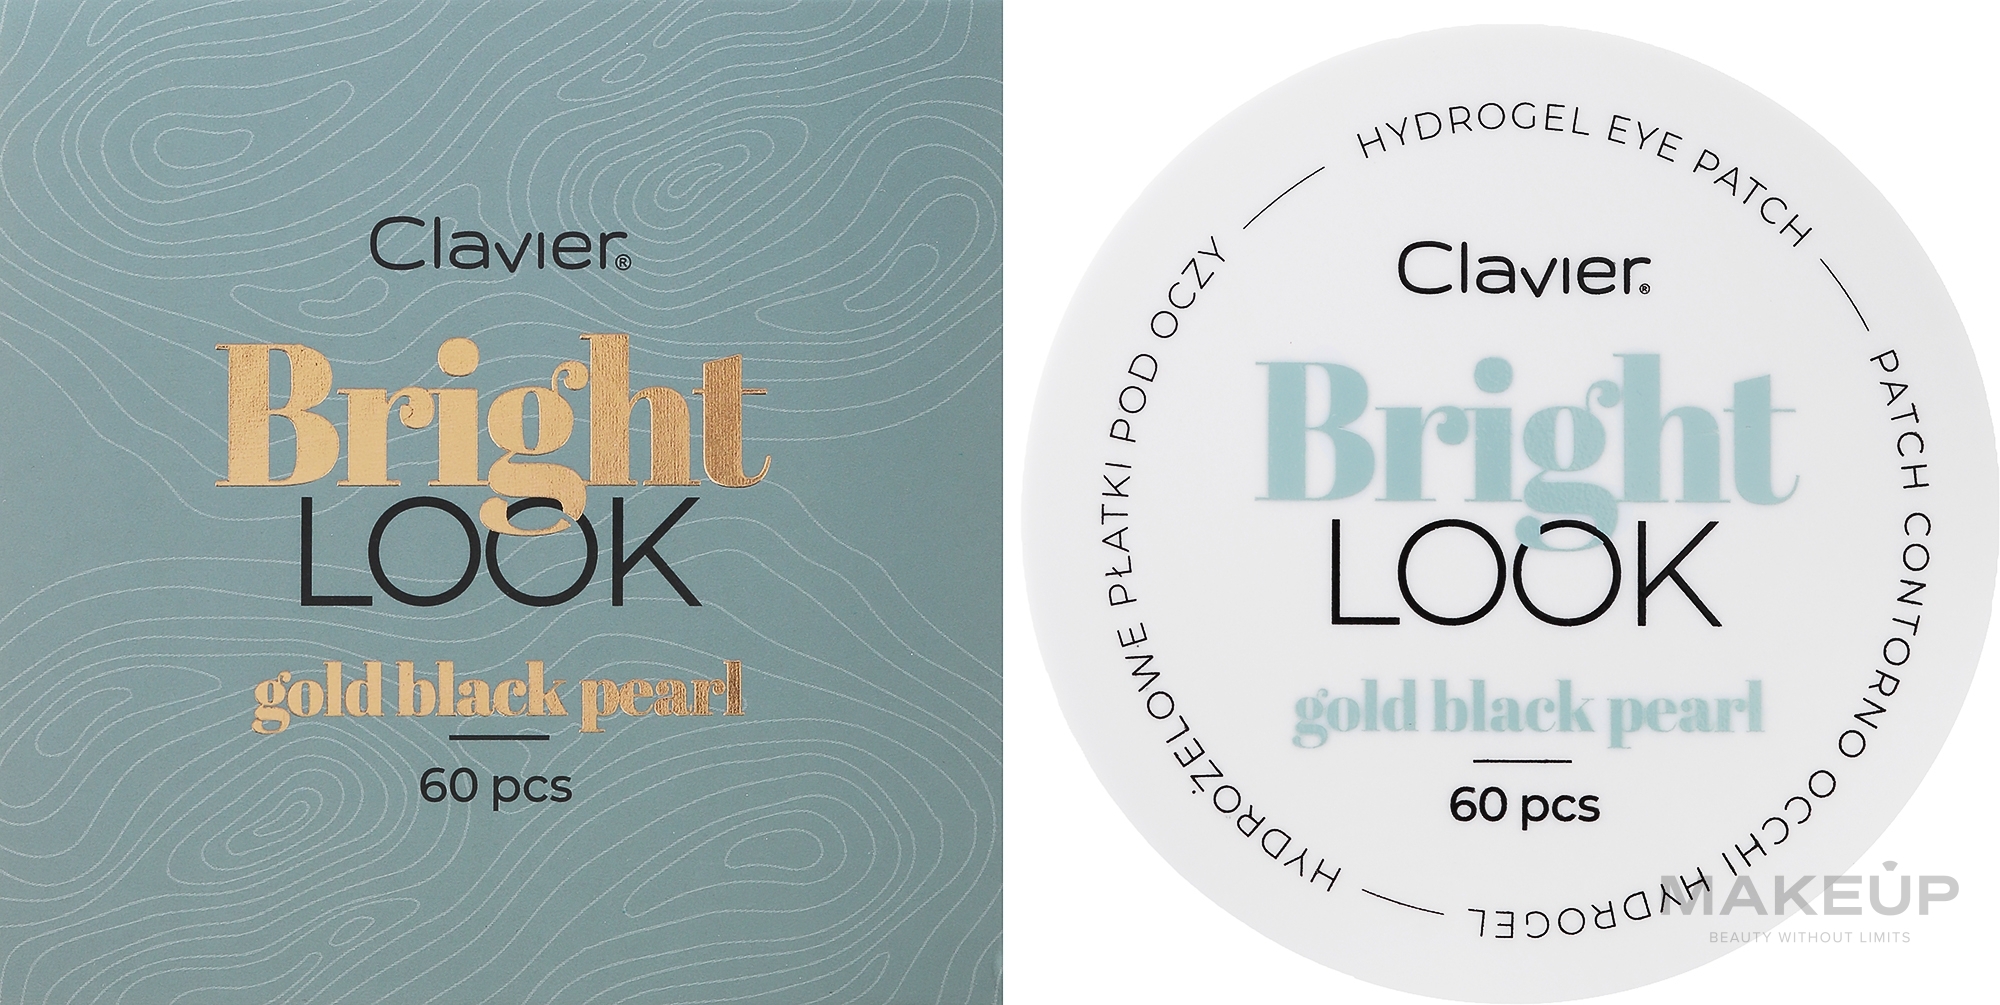 Hydrogel Eye Patches with Gold & Black Pearls - Clavier Bright Look Gold Black Pearl Hydrogel Eye Patch — photo 60 szt.